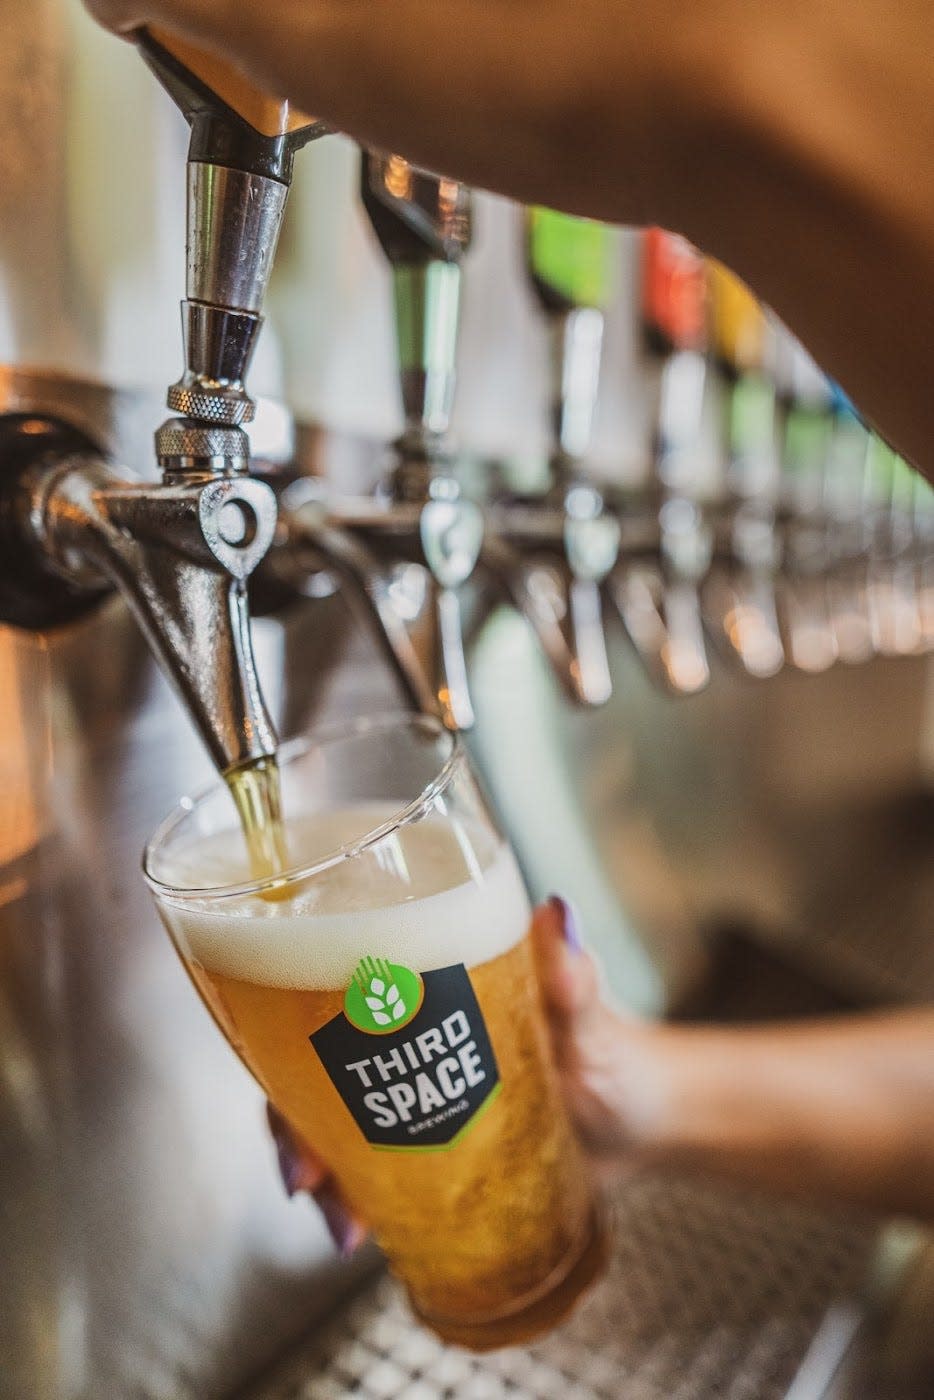 Third Space Brewing, which opened in Milwaukee in 2016, is opening a second location in Menomonee Falls. Third Space Innovation Brewhouse is expected to open in the spring of 2024 at Good Hope Road and Appleton Avenue.